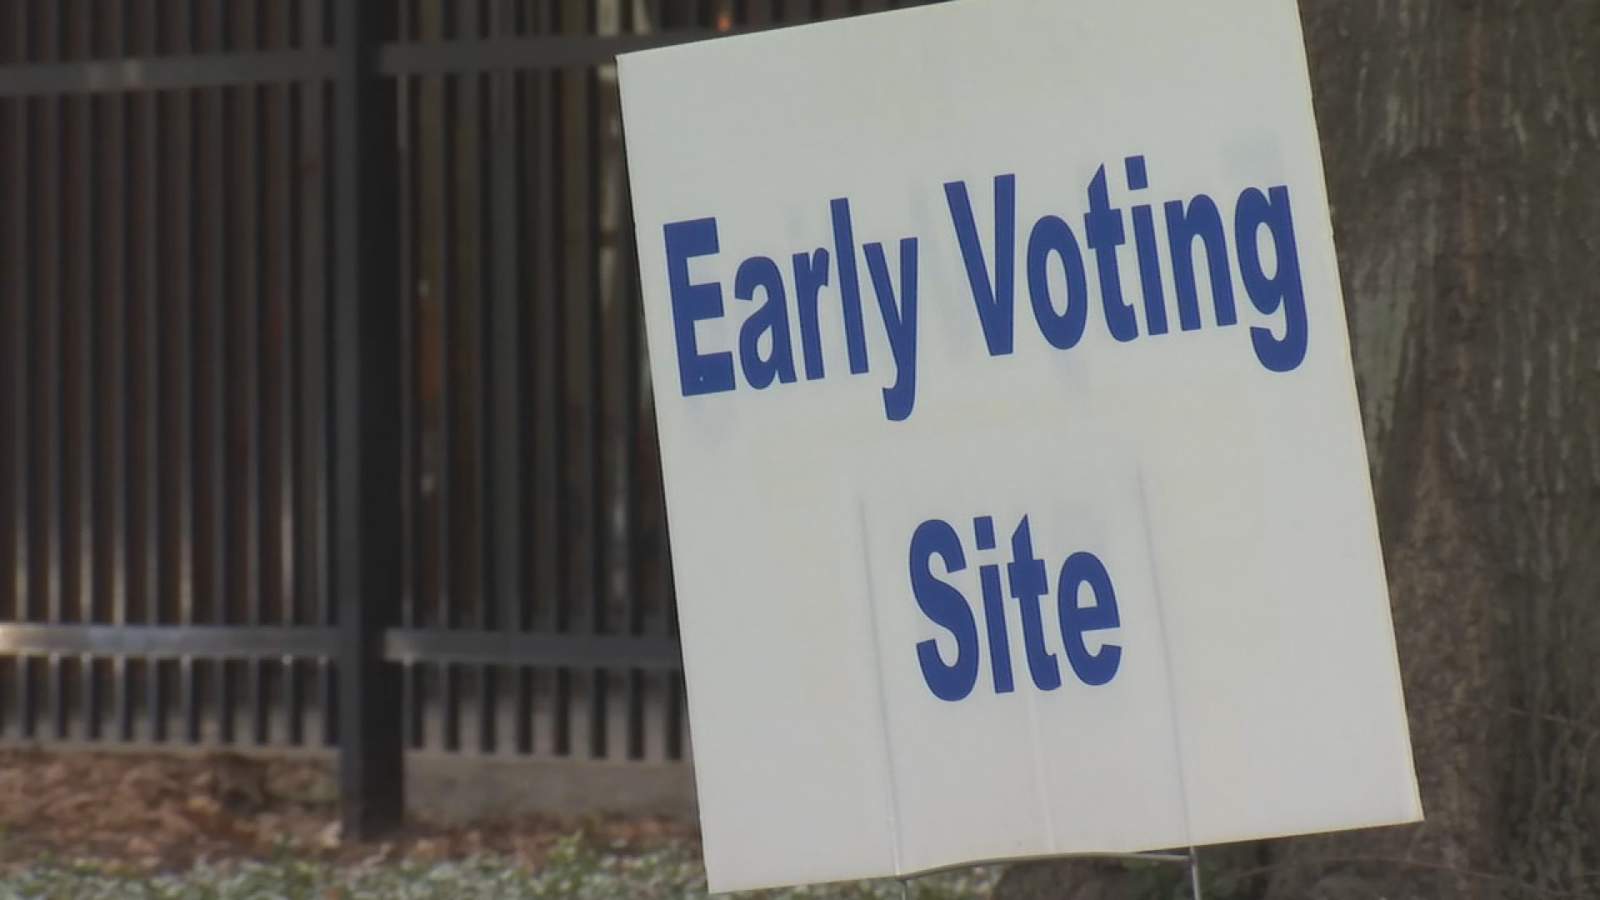 ‘Tote to Vote’ initiative providing free rides to early voting sites